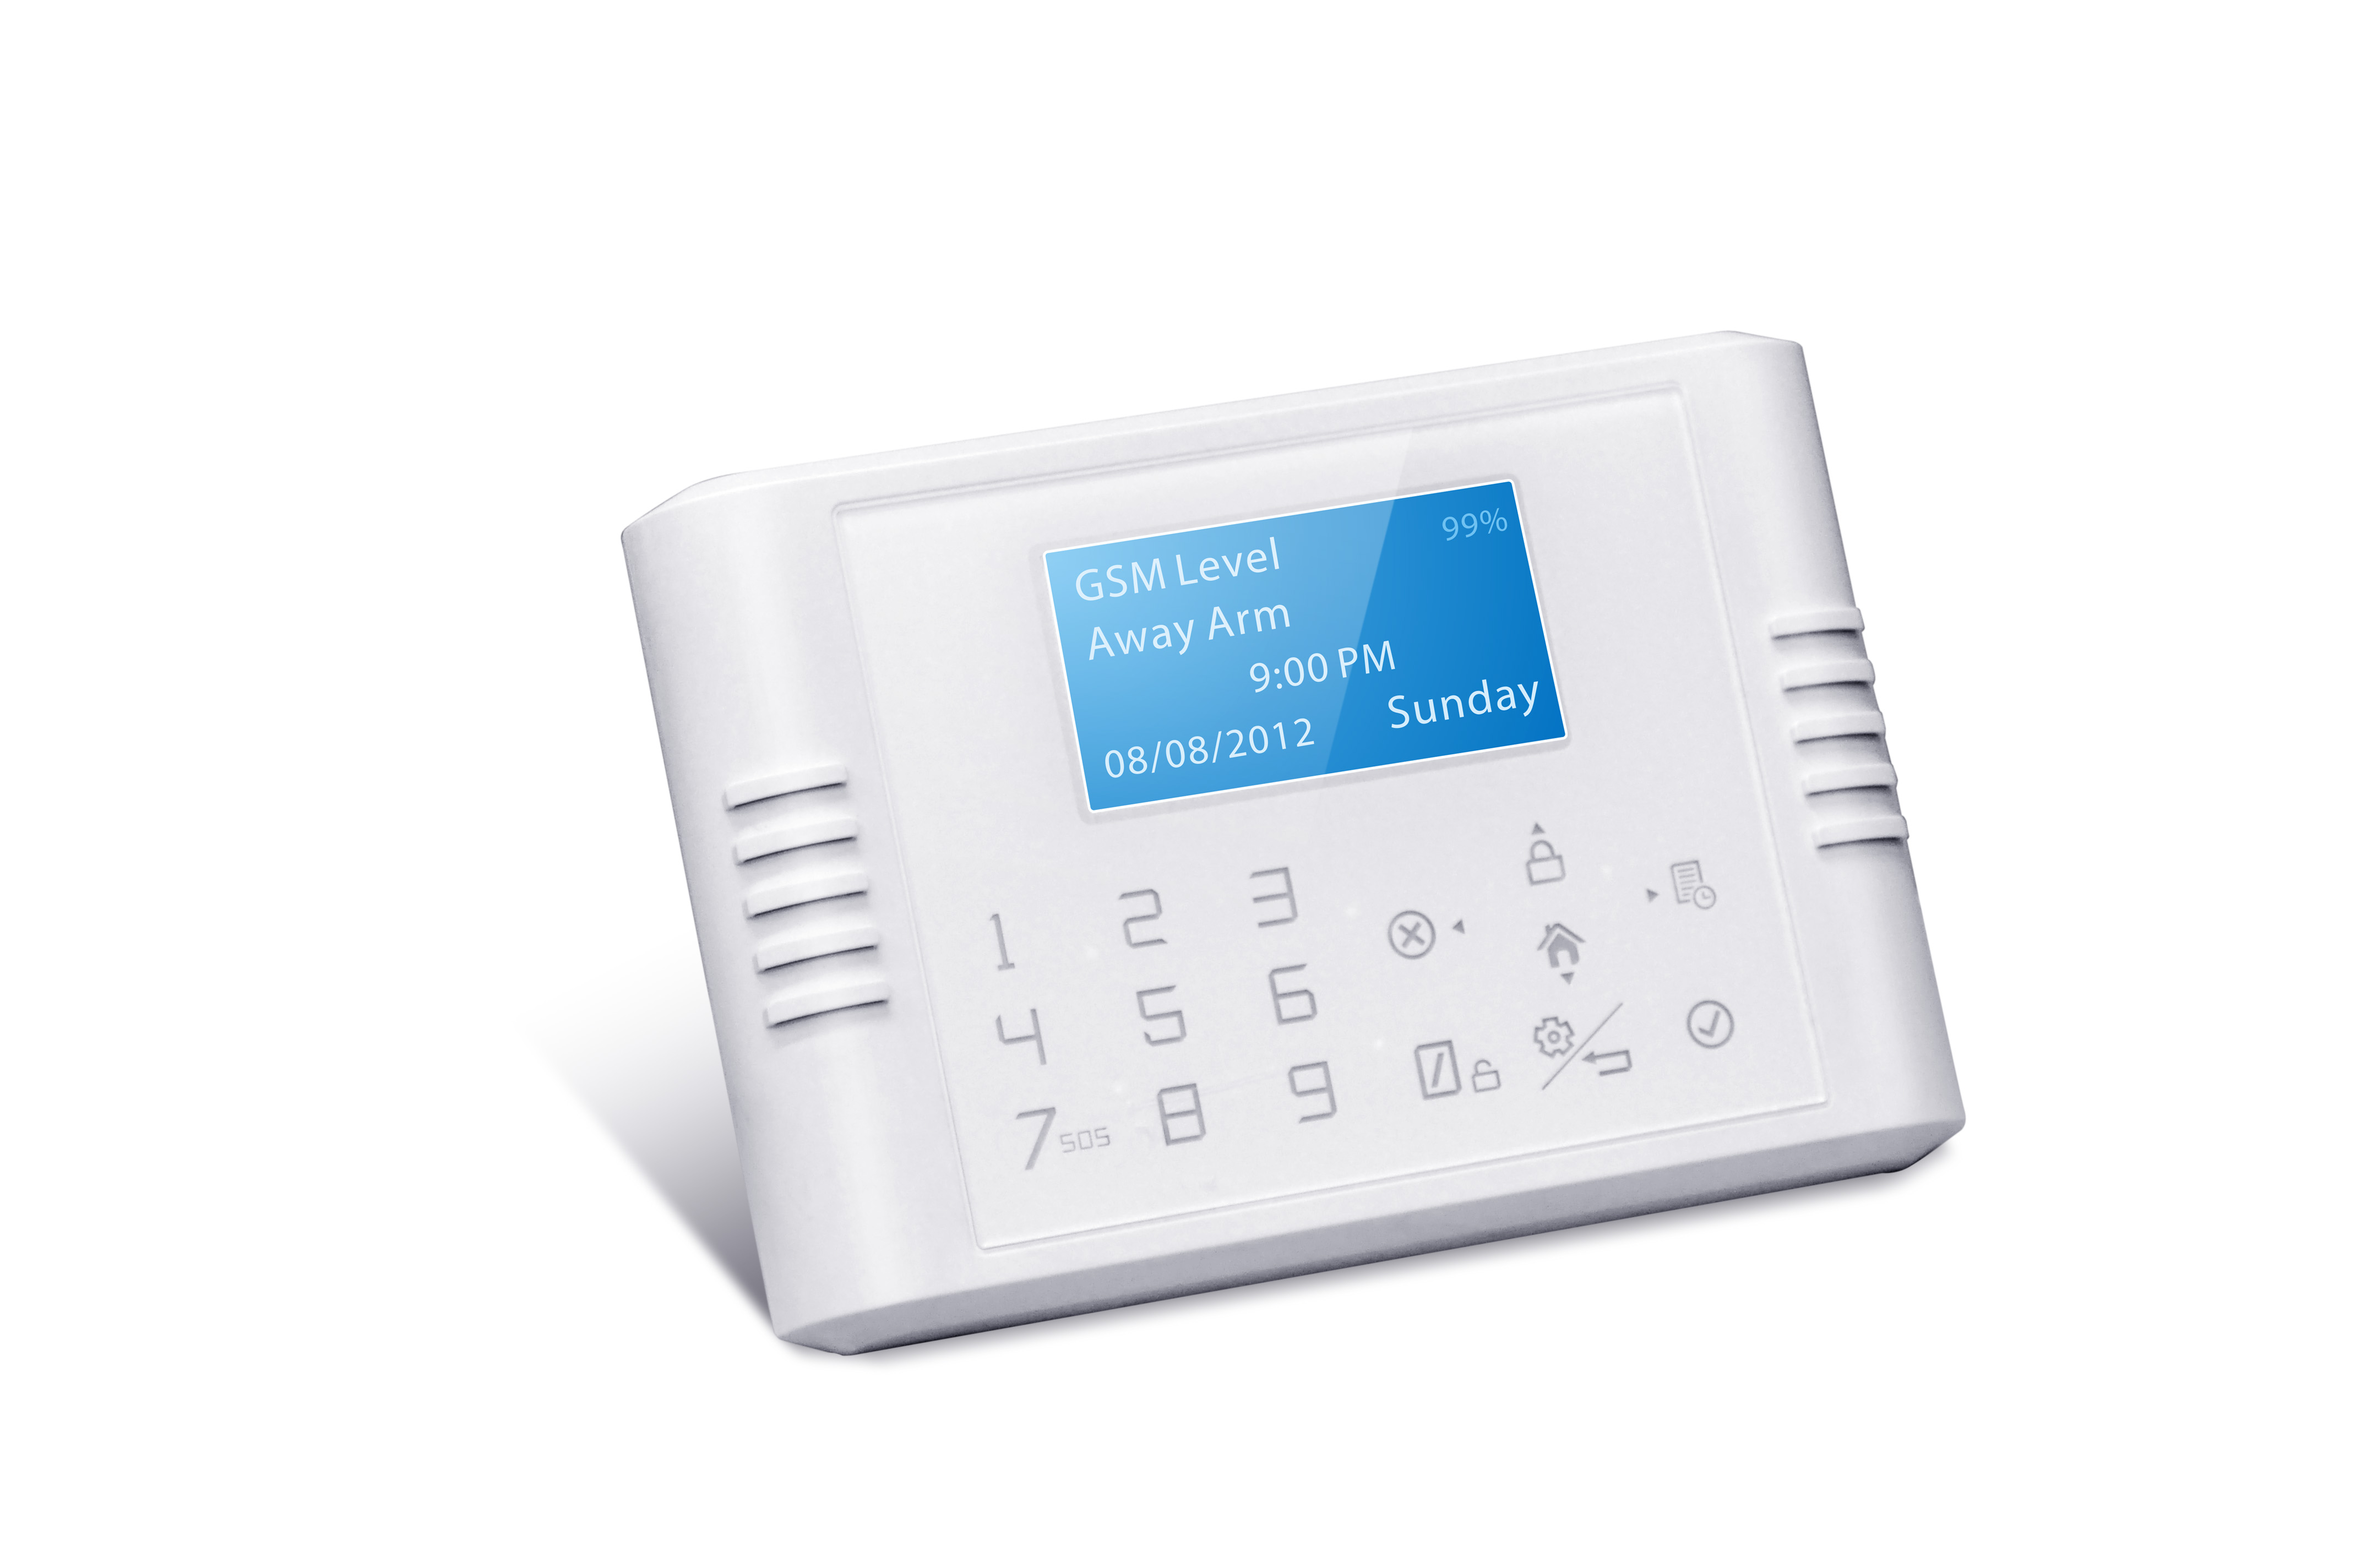 New house security alarm system with dual GSM+PSTN network